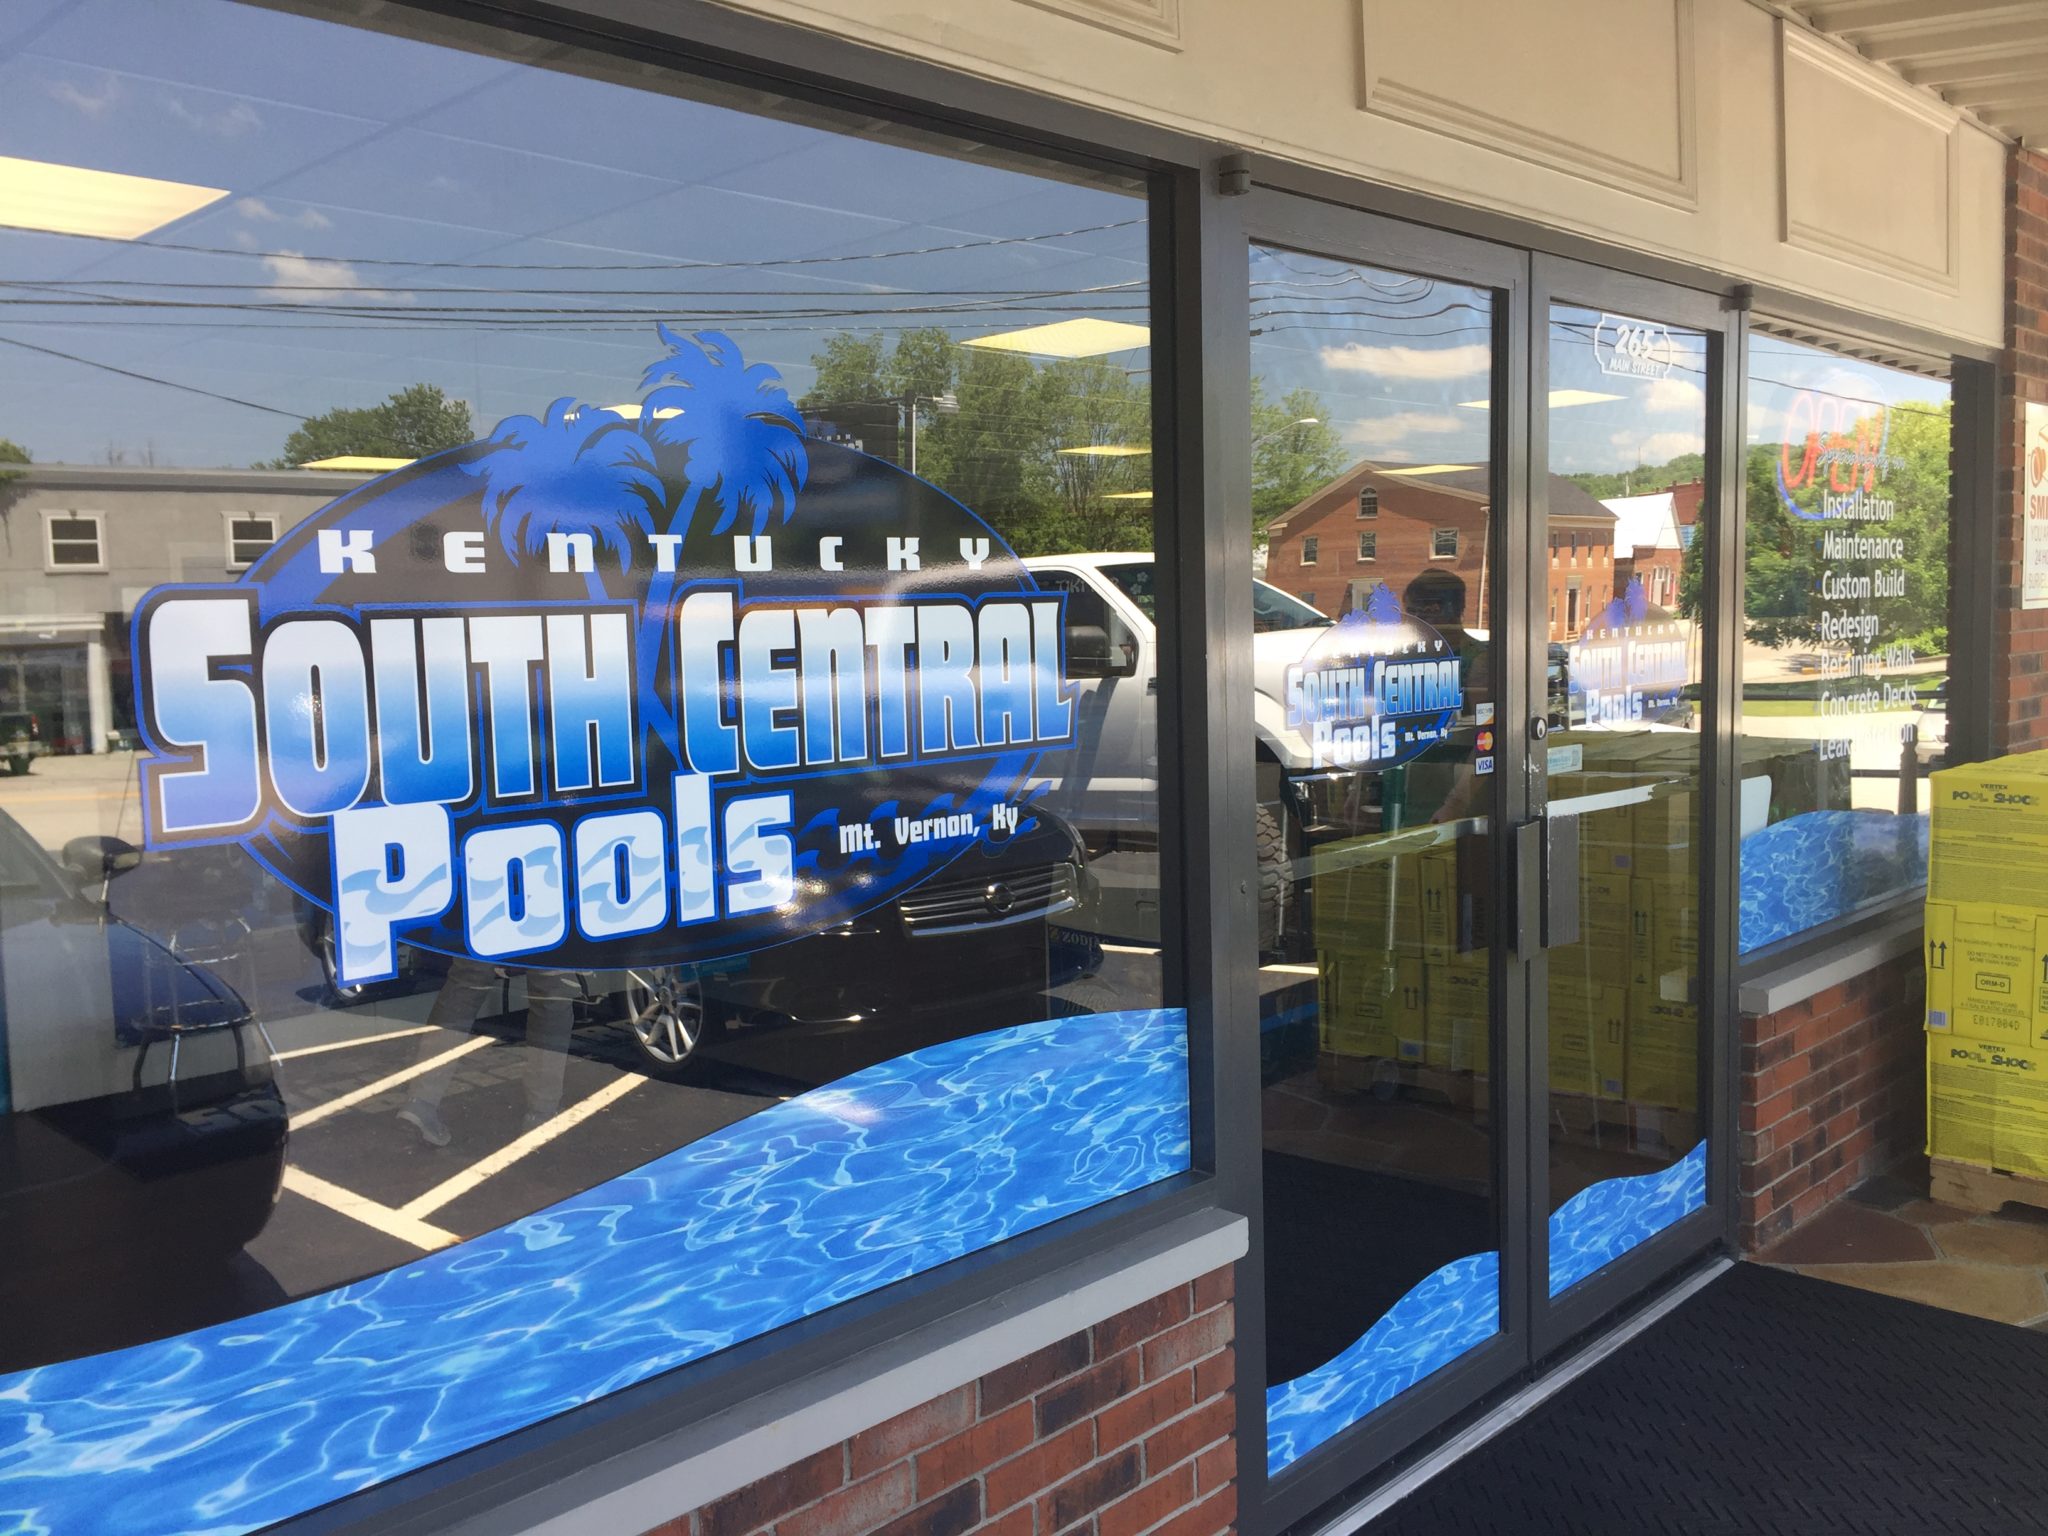 Store front for Kentucky South Central Pools LLC in Mt. Vernon KY